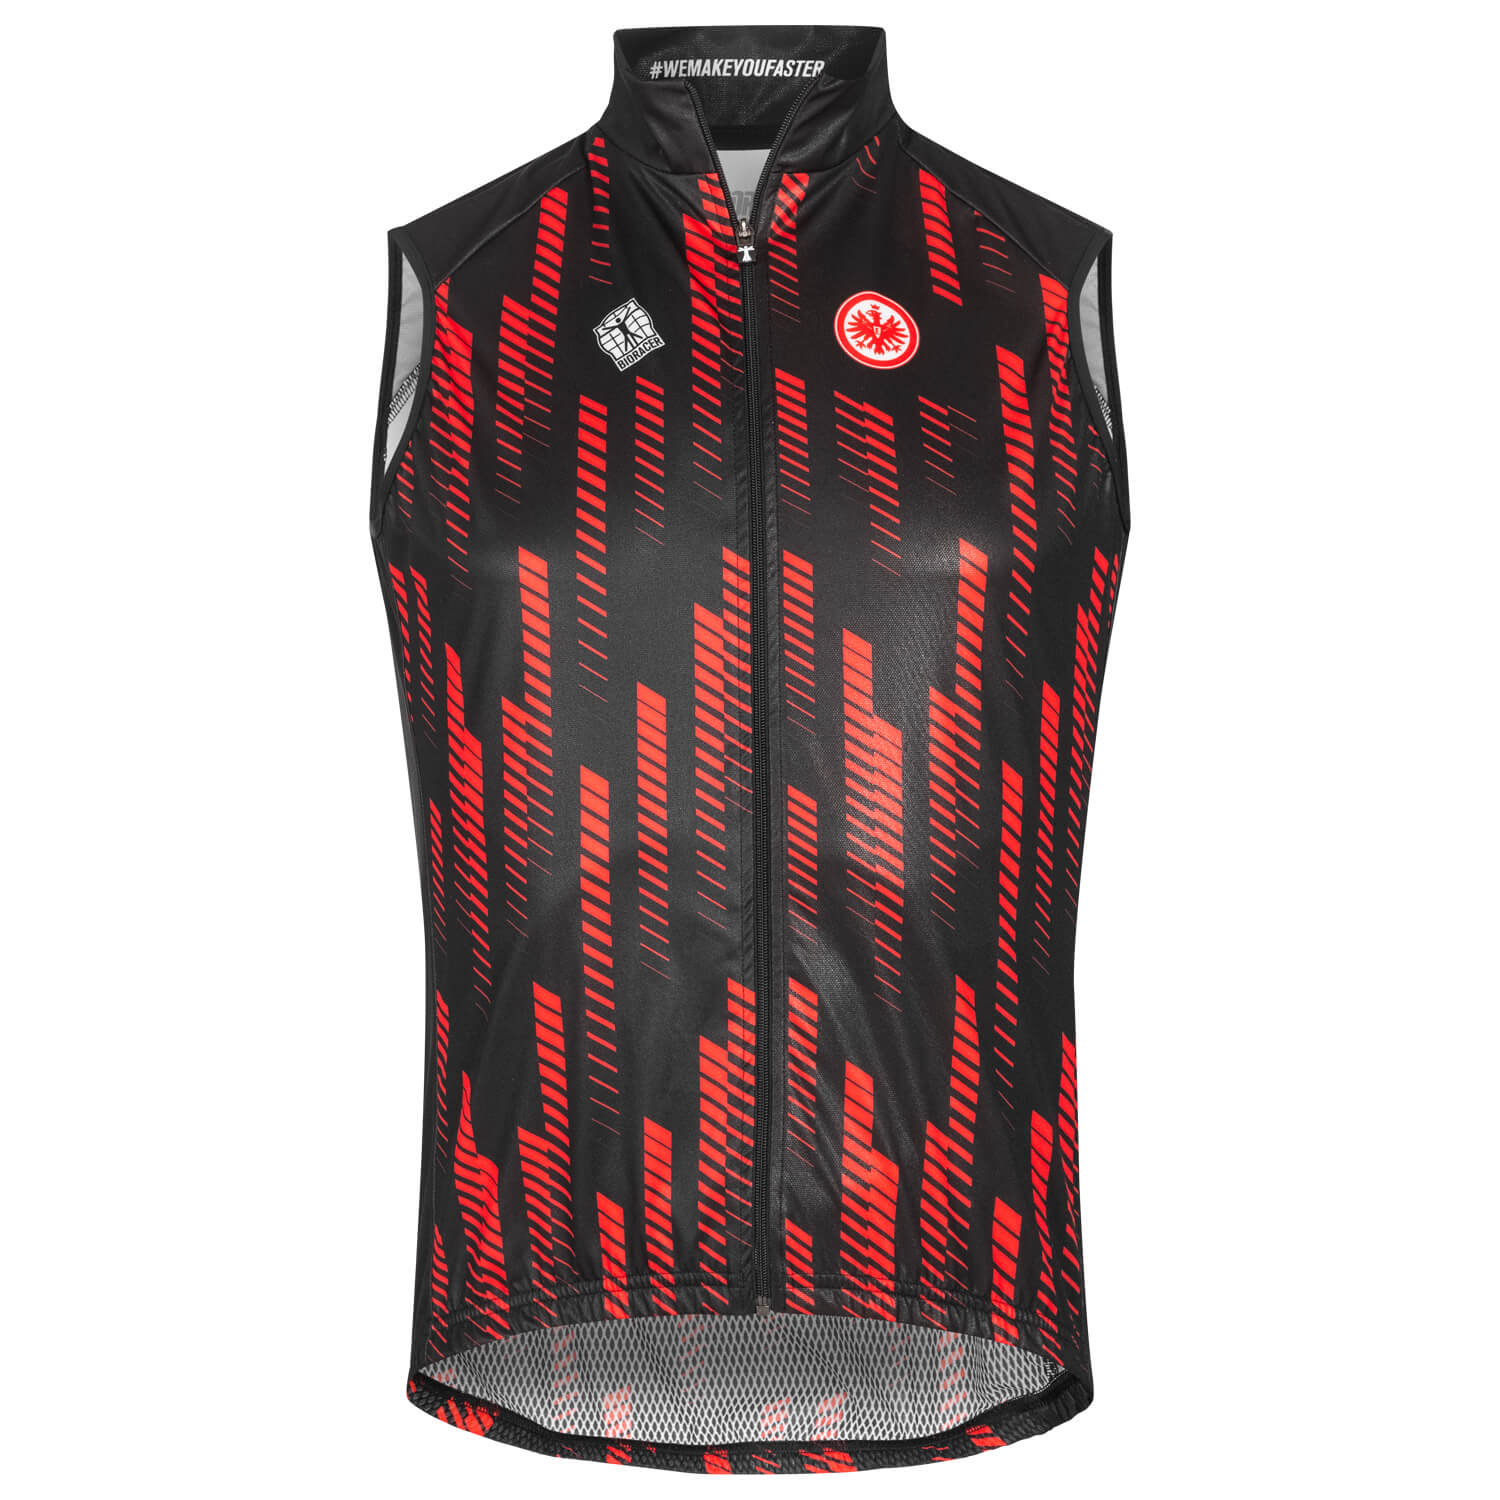 Bild 1: Cycling Vest Red Style 